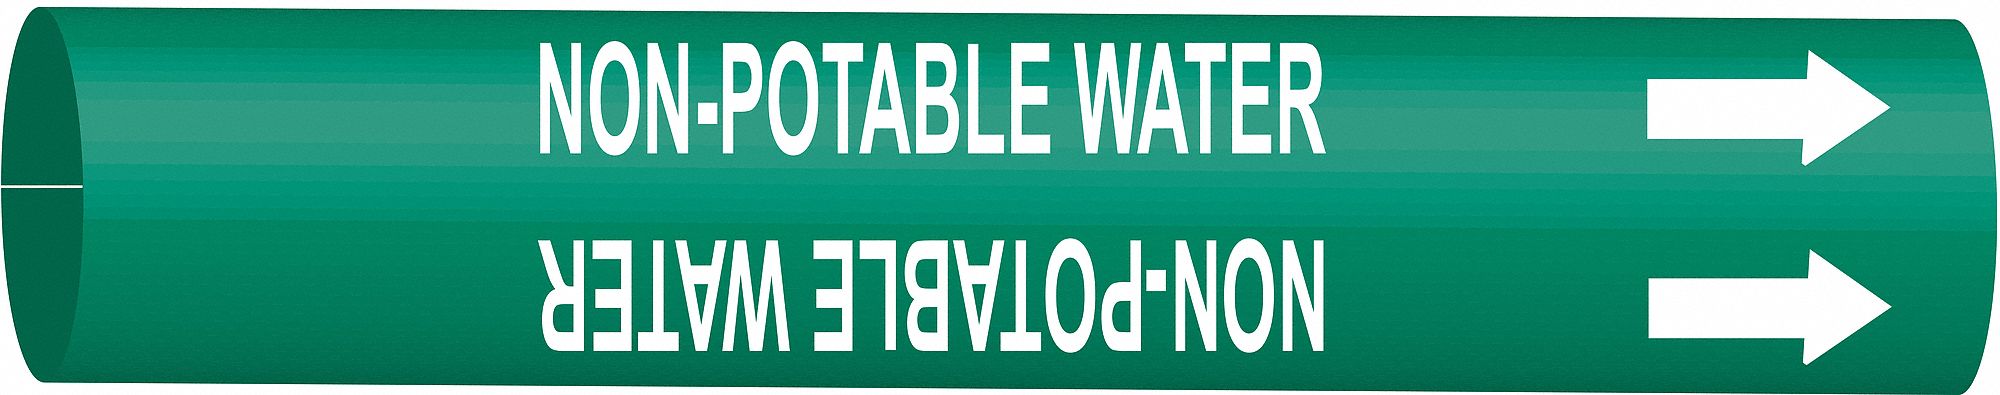 Pipe Marker,Non-Potable Water,10to15 In